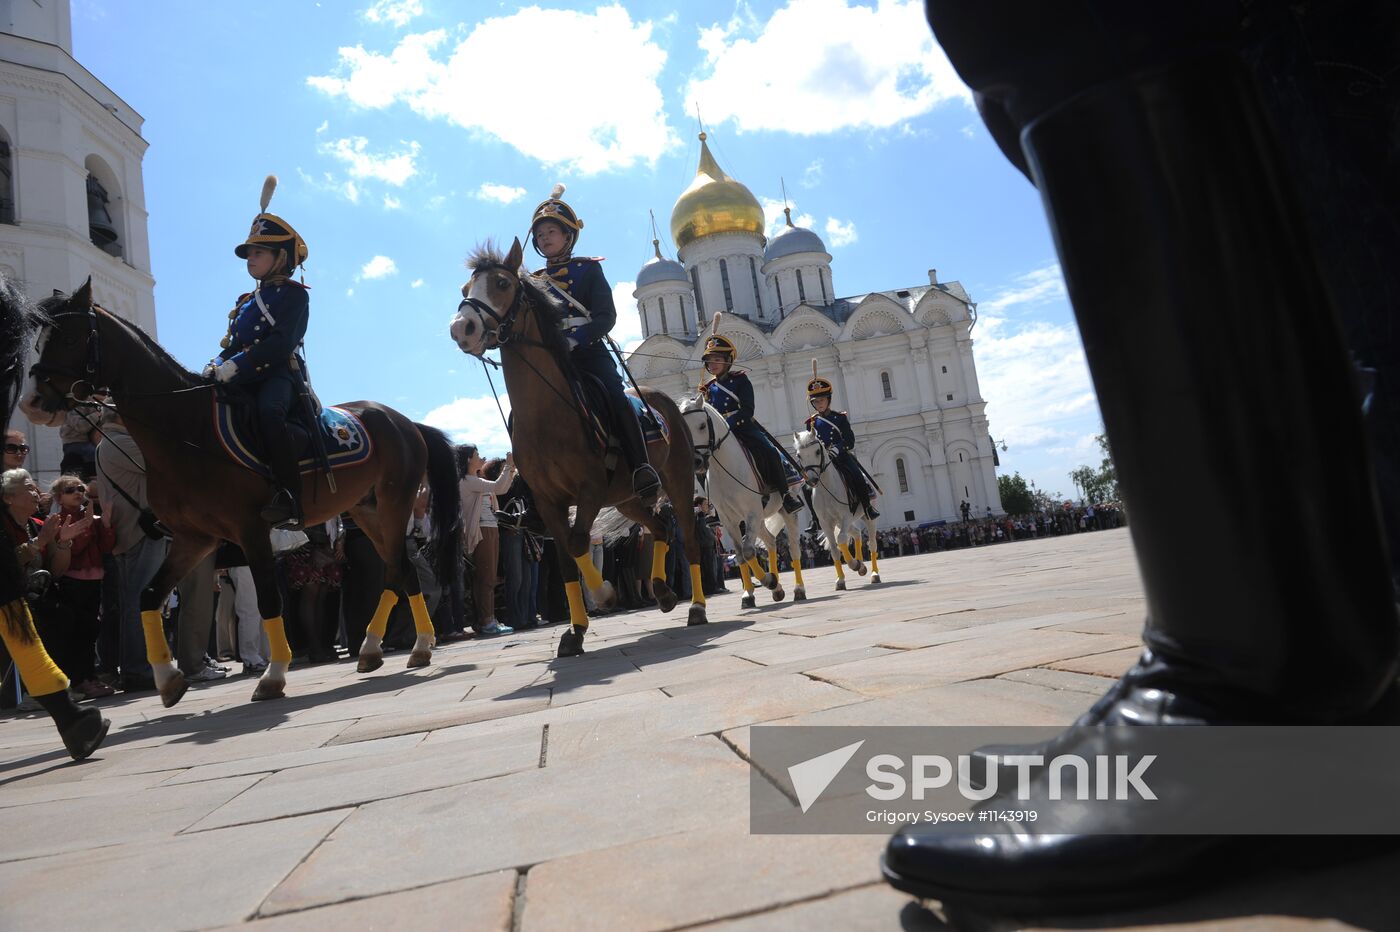 Separation ceremony of President regiment horse and foot guards